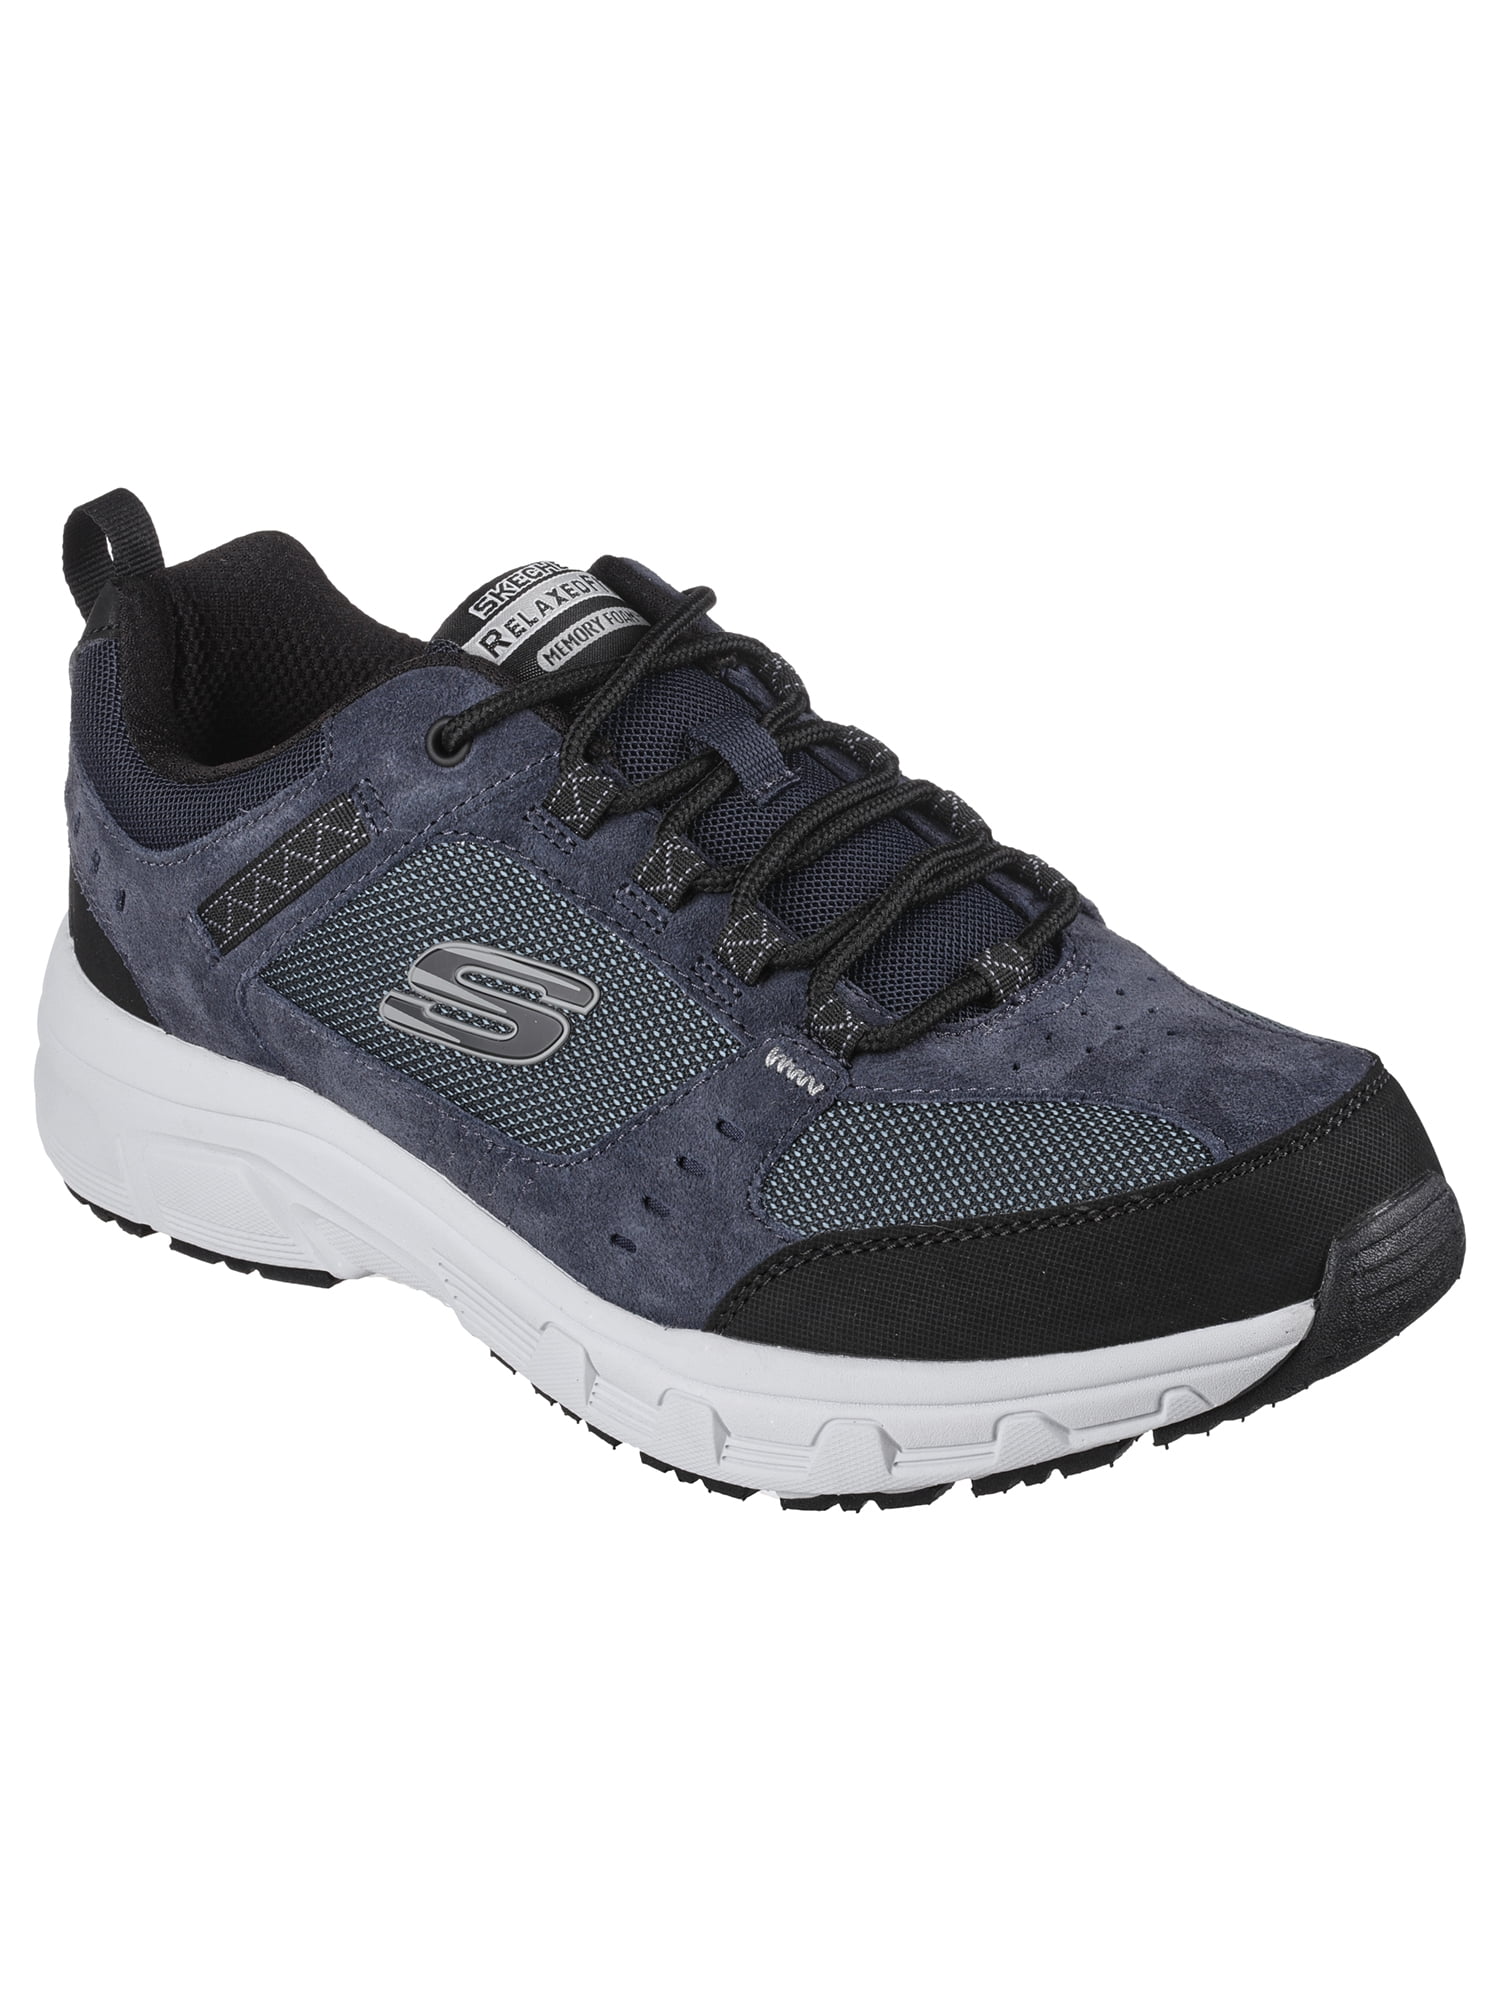 Skechers Relaxed Fit Mens Black | tunersread.com